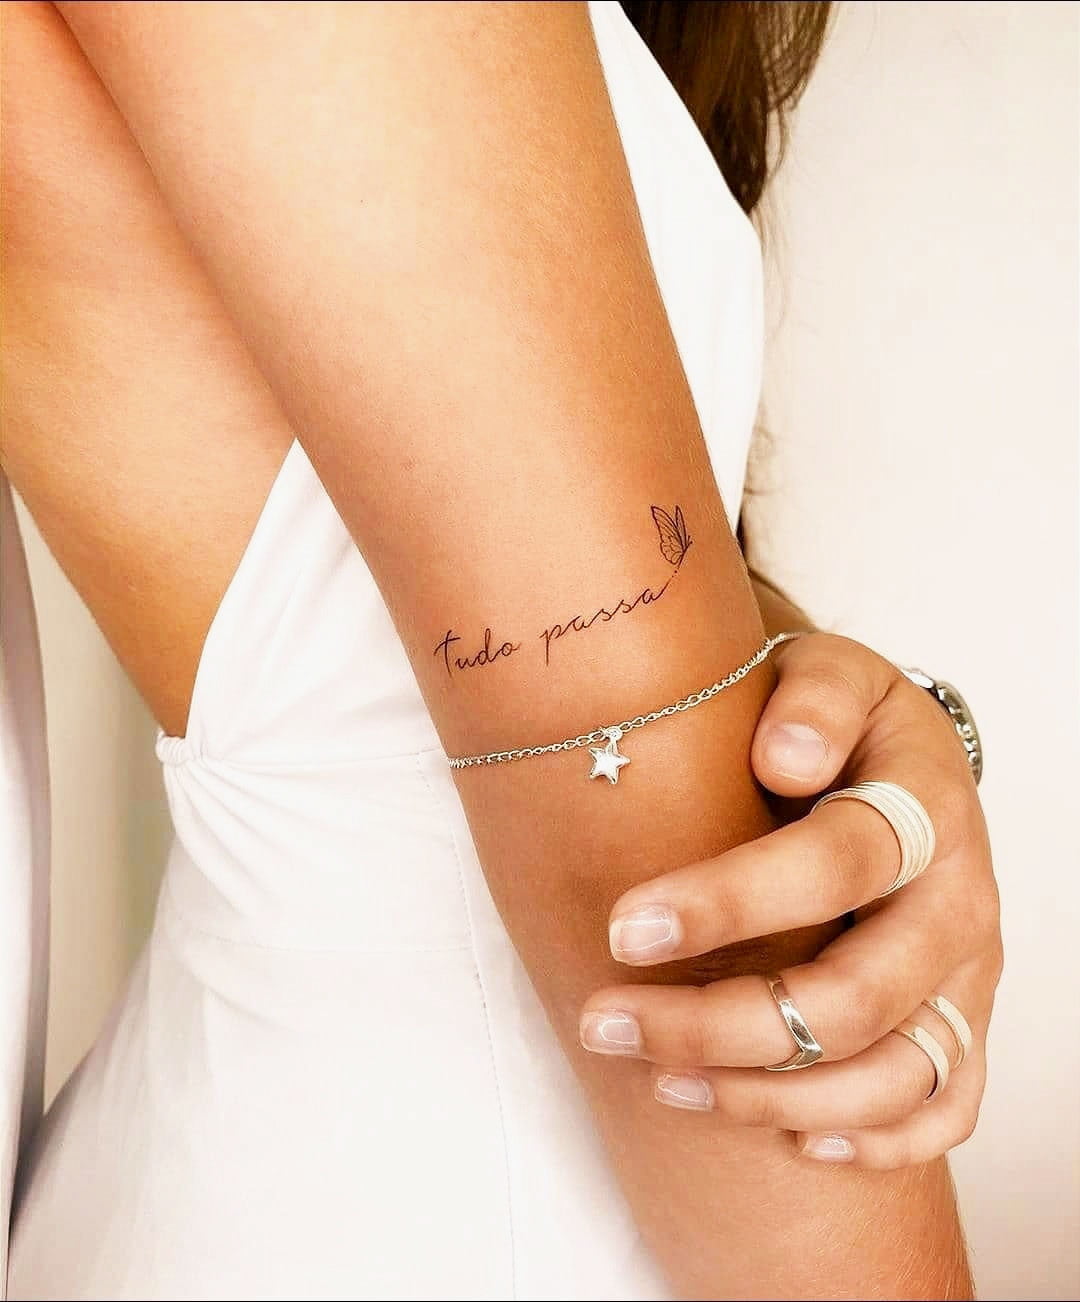 17 Meaningful Small Wrist Tattoos For Women in 2023 20